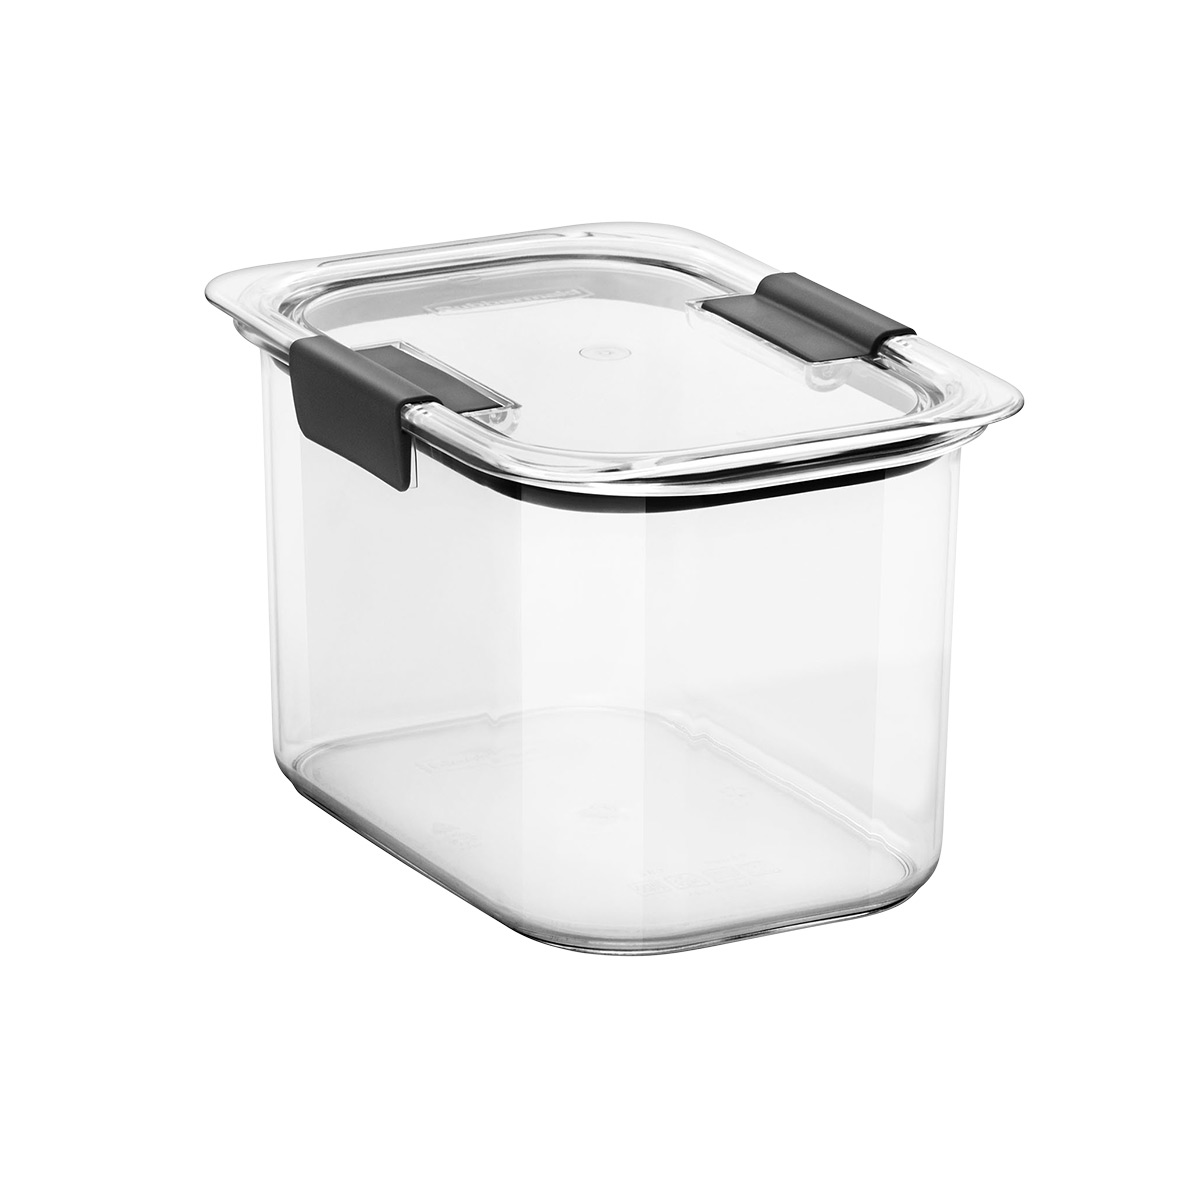 https://www.containerstore.com/catalogimages/513721/10098681-2183248_01-rubbermaid-ven.jpg